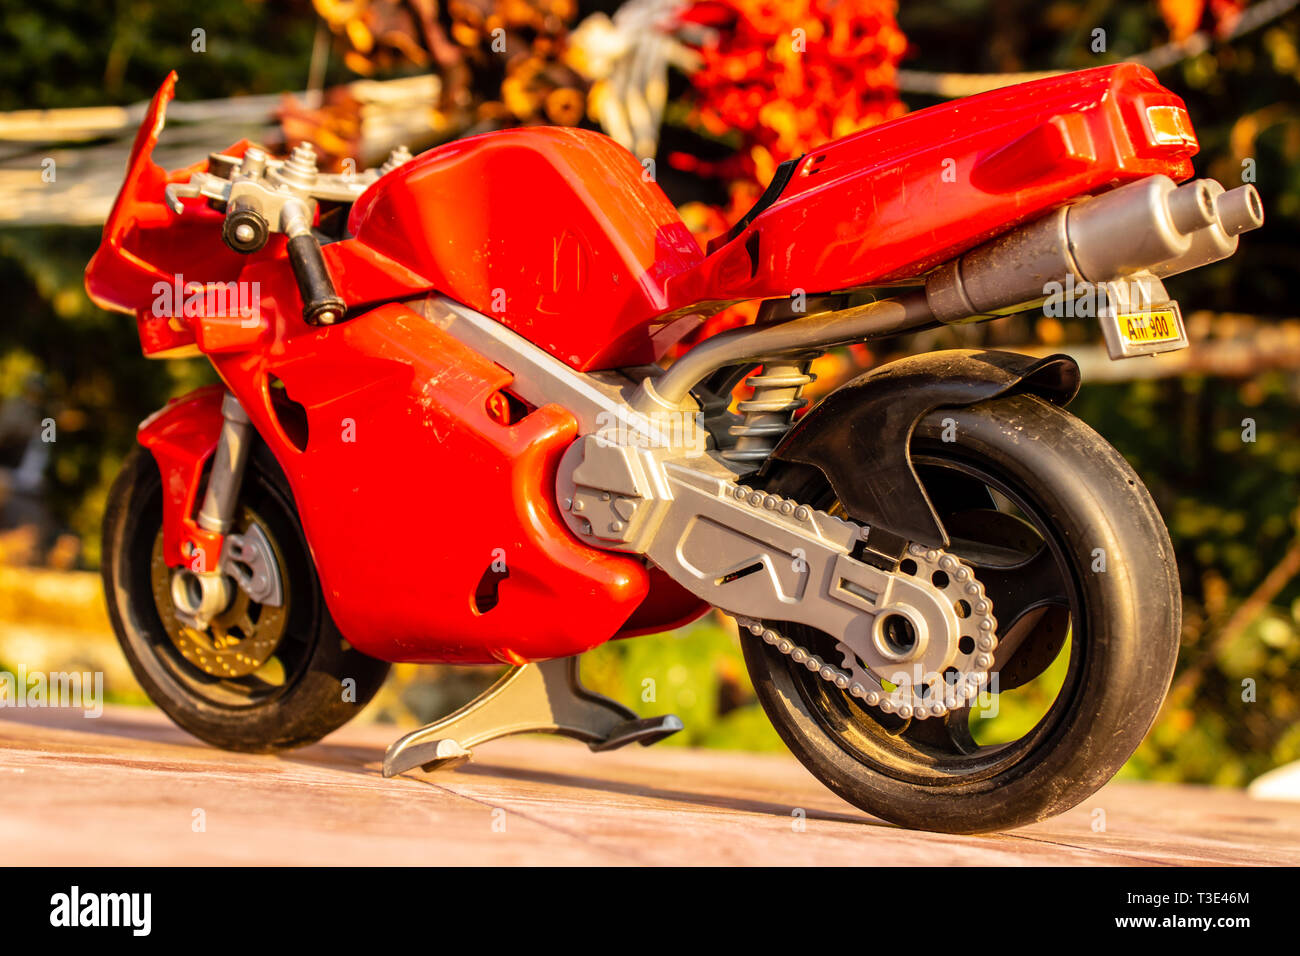 a back view isolated closeup red toy motorcycle with cold colors. photo has taken from a garden. Stock Photo